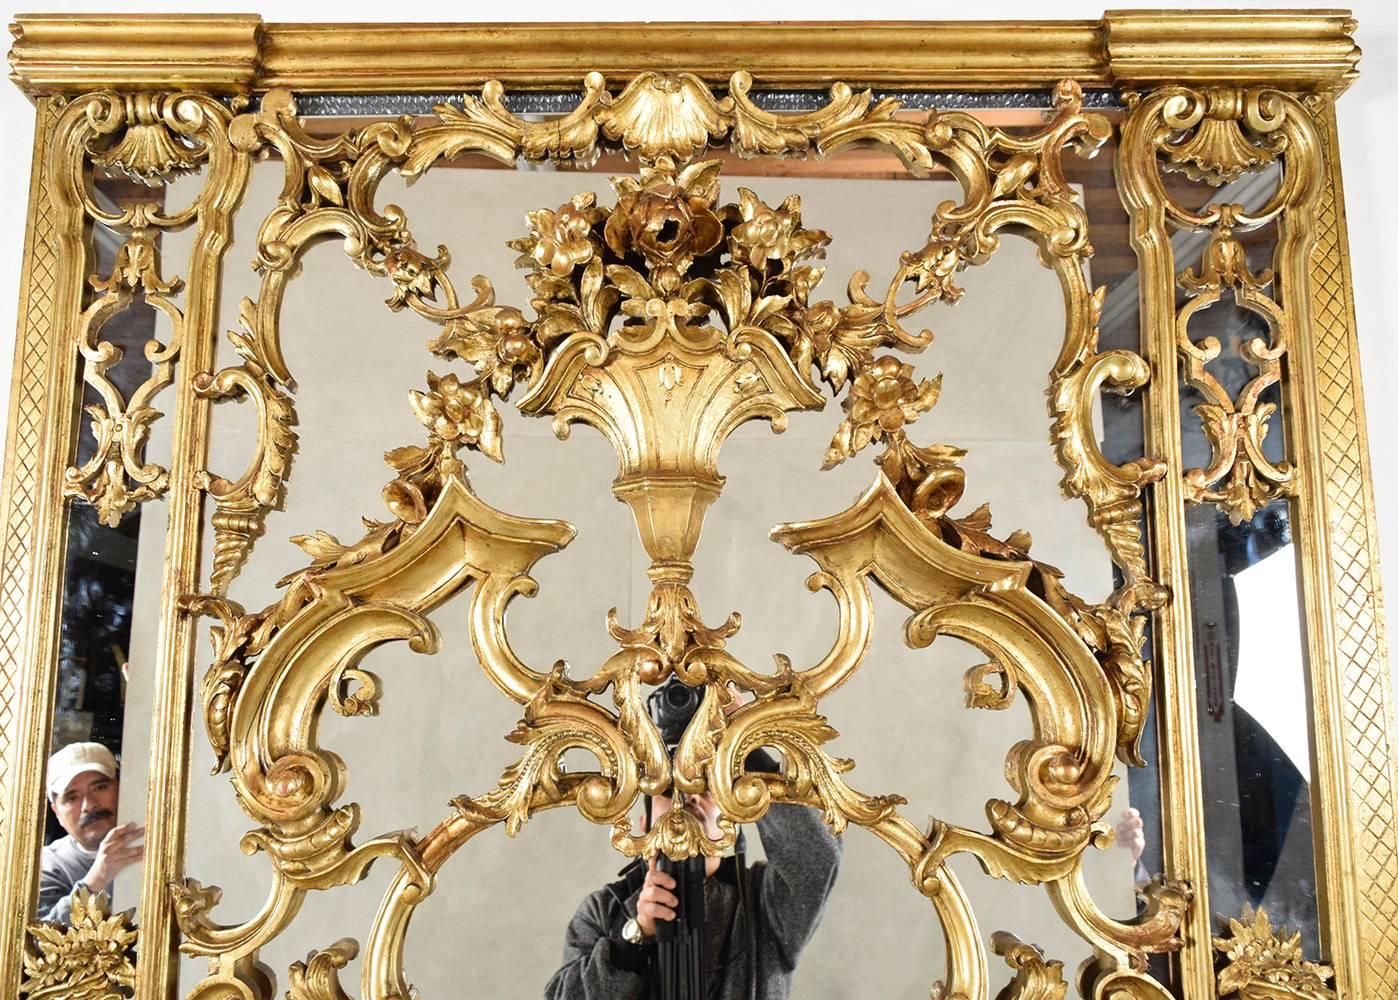 This stately 1900's Louis XVI-style large giltwood mirror will be the center of attention in any room. The solid wood frame is finished in a gold color and features heavily carved decorations of flowers, roses, scrolls, vases, leafs, and sea shells.